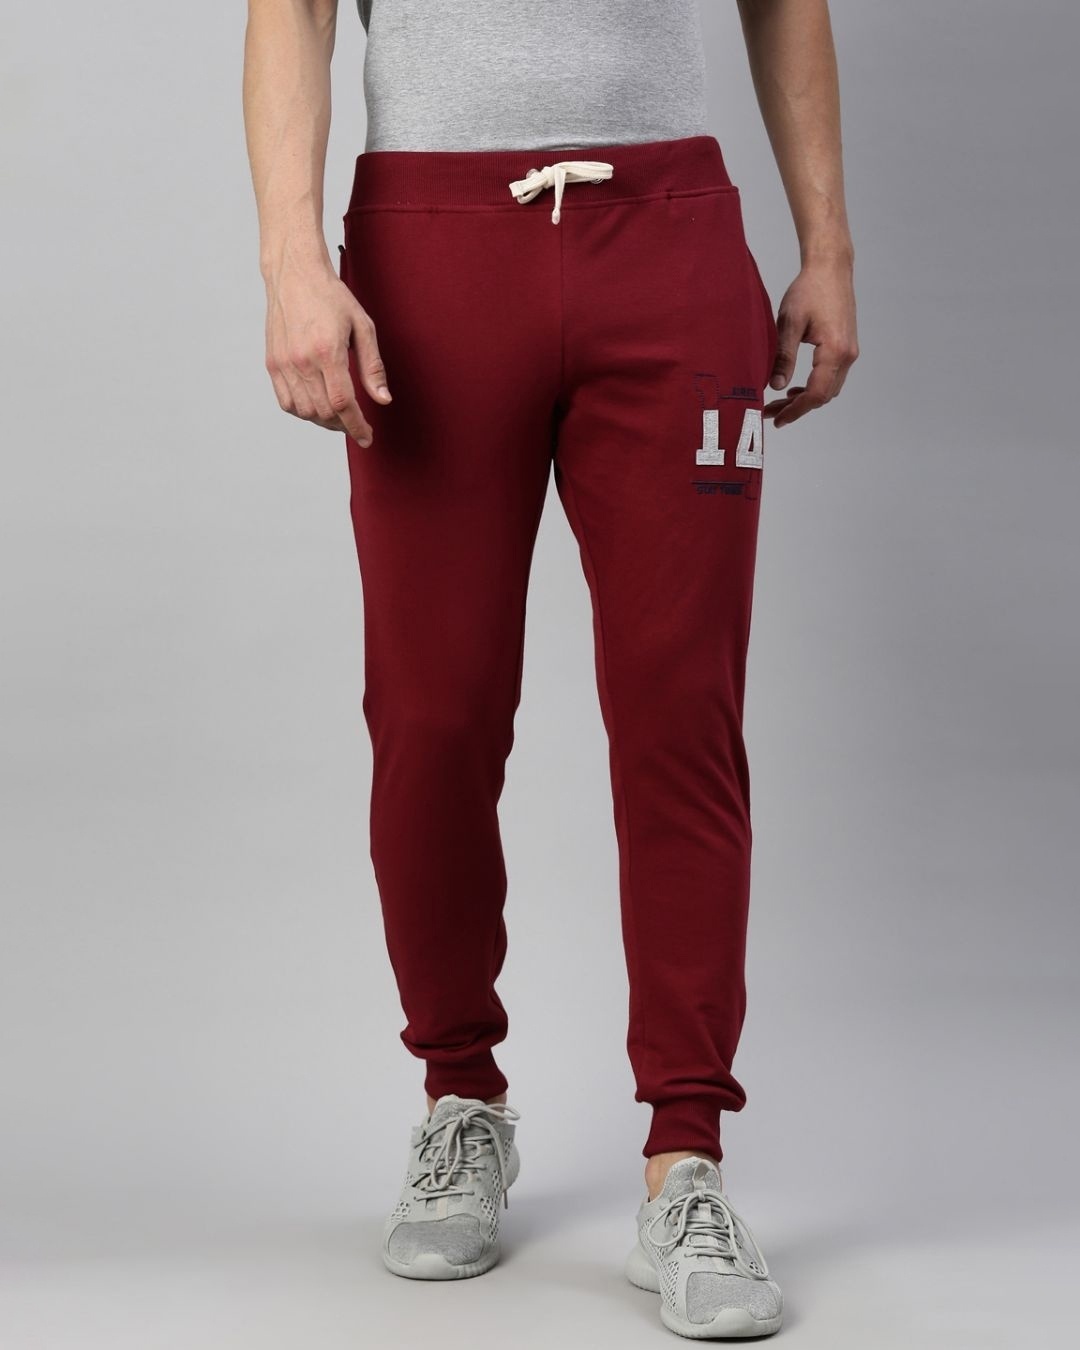 Buy Men's Maroon Embroidered Slim Fit Joggers for Men Maroon Online at ...